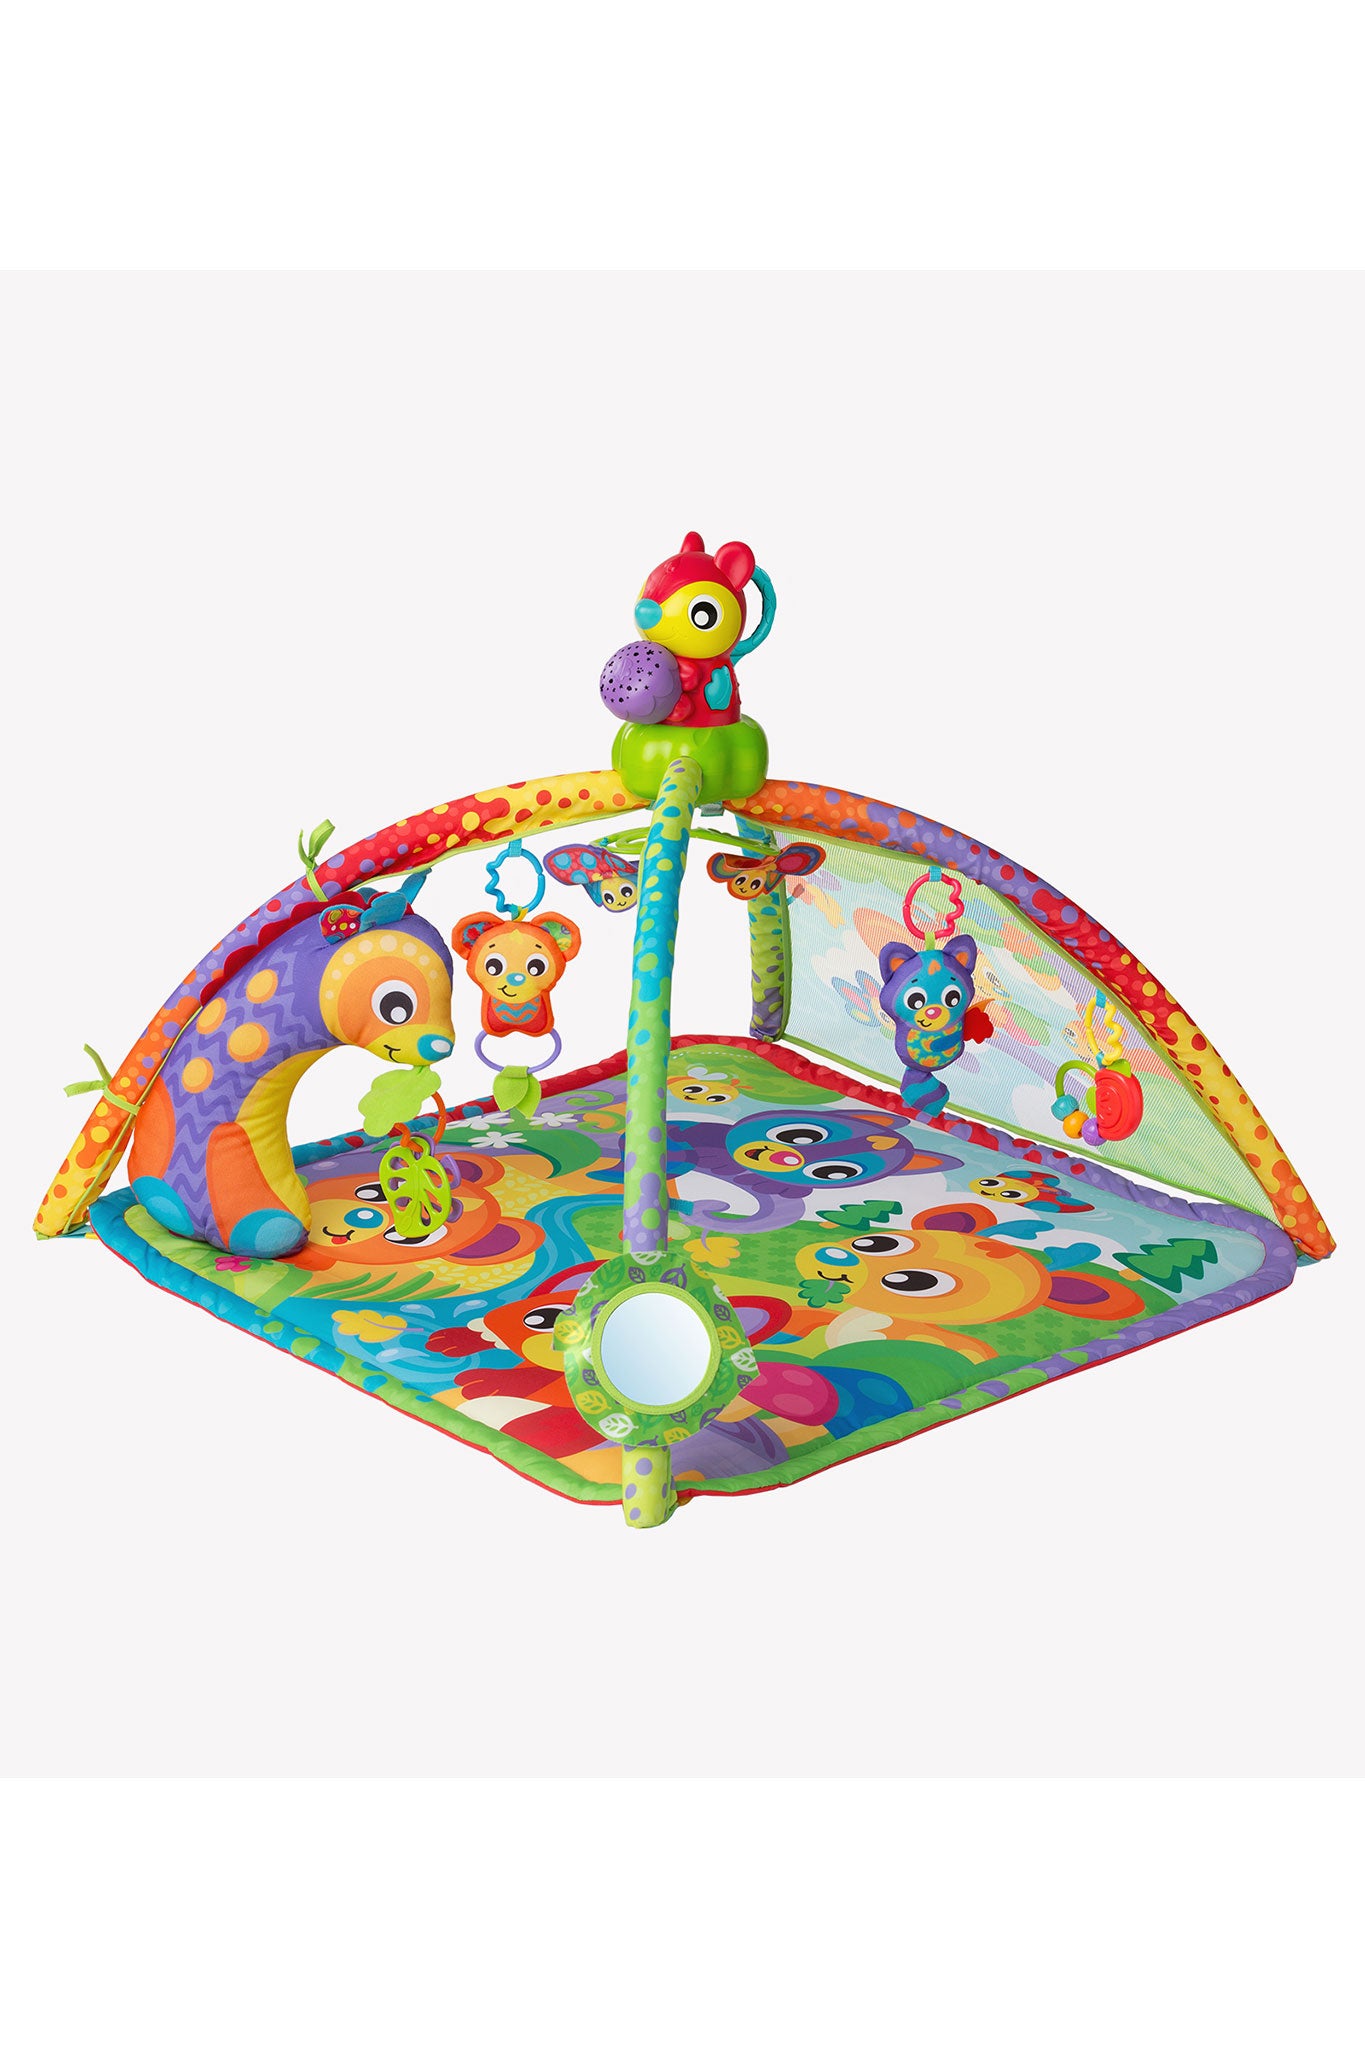 Playgro Gym Woodlands Music And Lights Projector